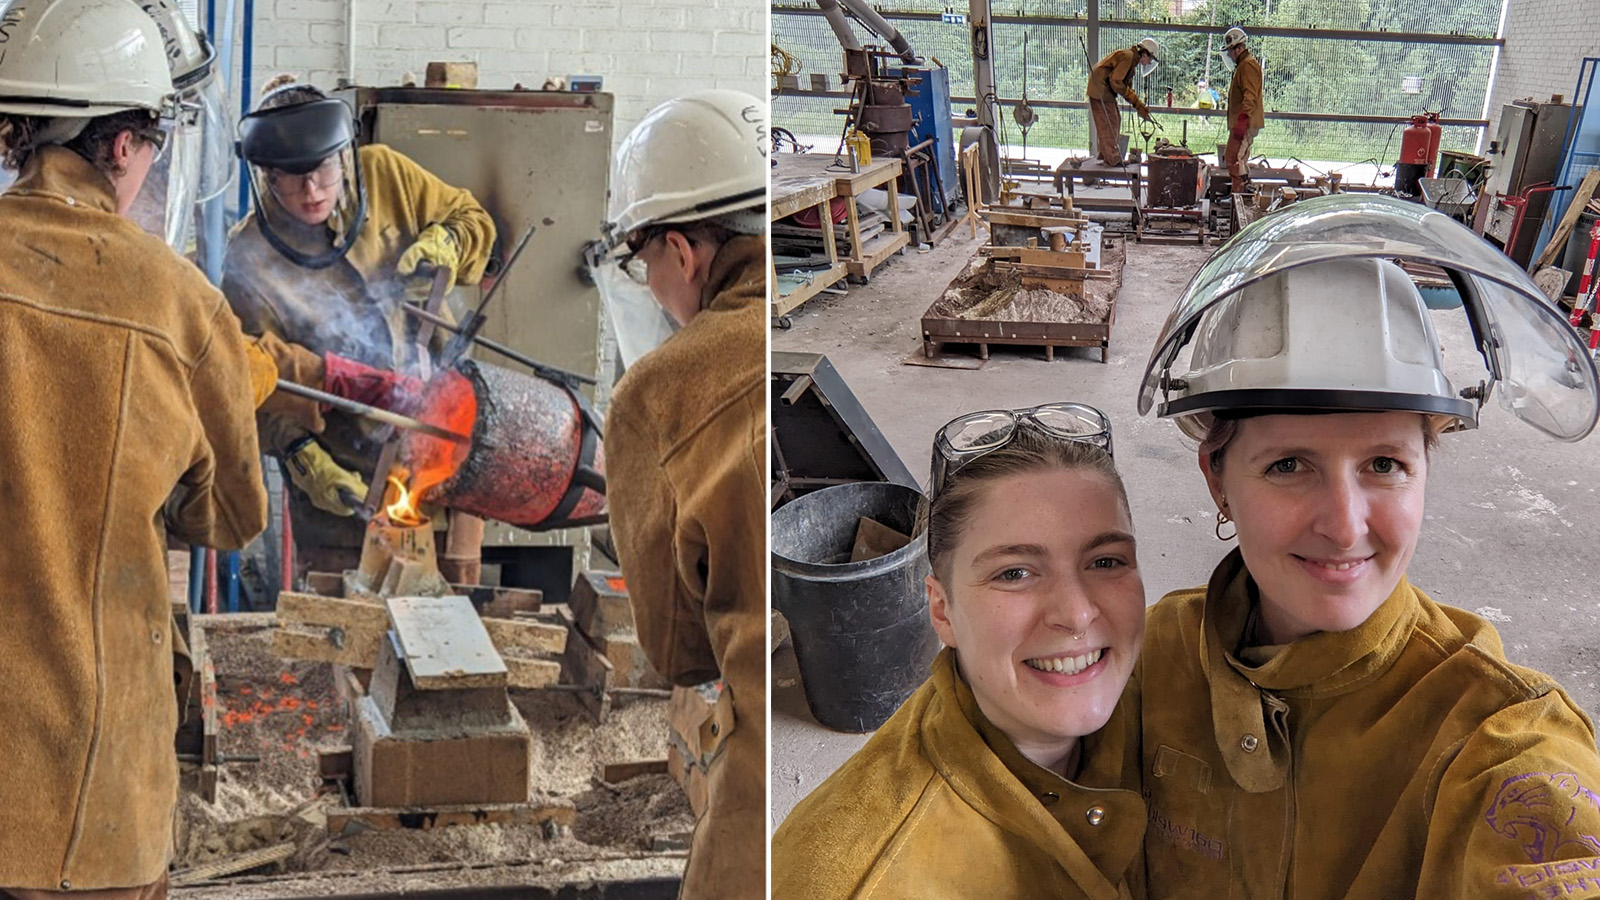 A composite image showing Kathryn Hanna at work in her studio with other artists; in one she is working in a sculpture workshop, in one she is pictured in protective gear with another artist.